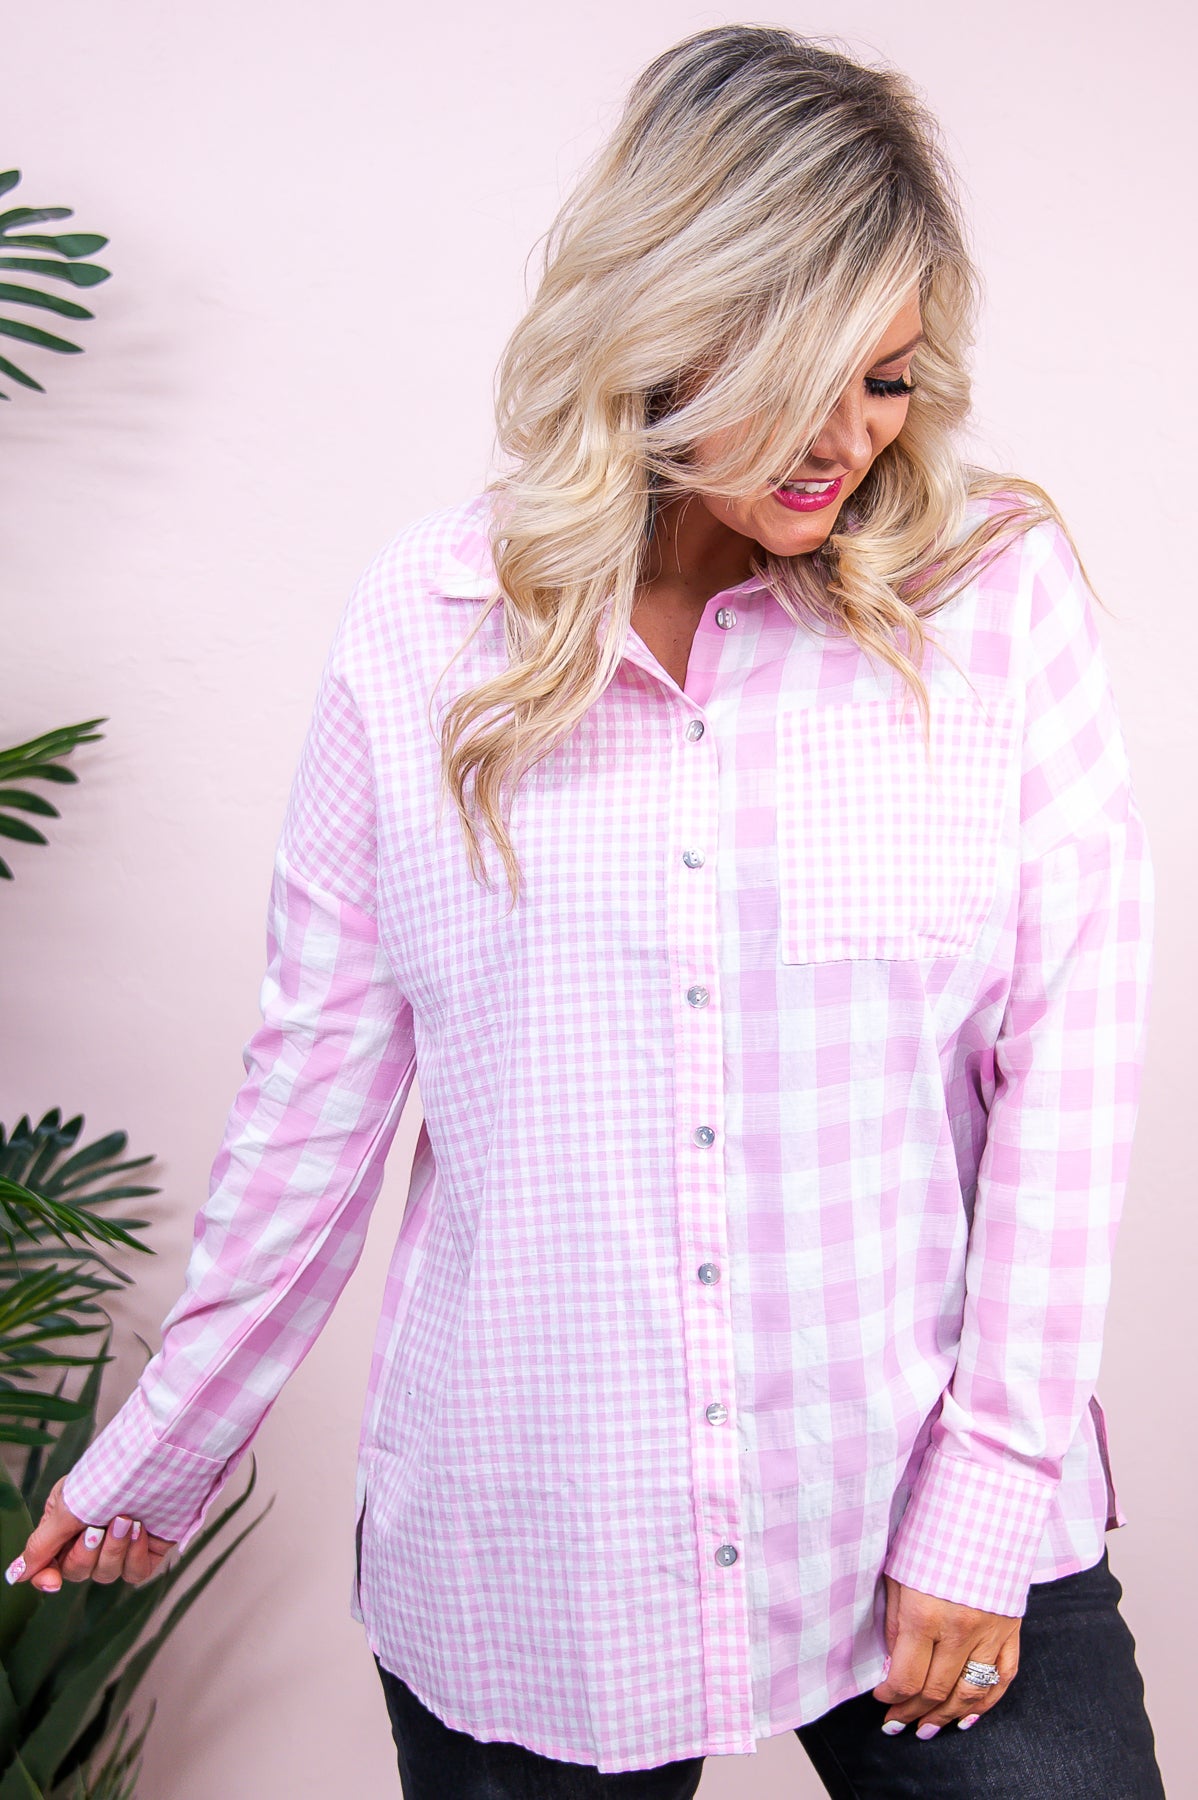 Girls Just Wanna Have Fun Pink/White Checkered/Plaid Top - T8842PK